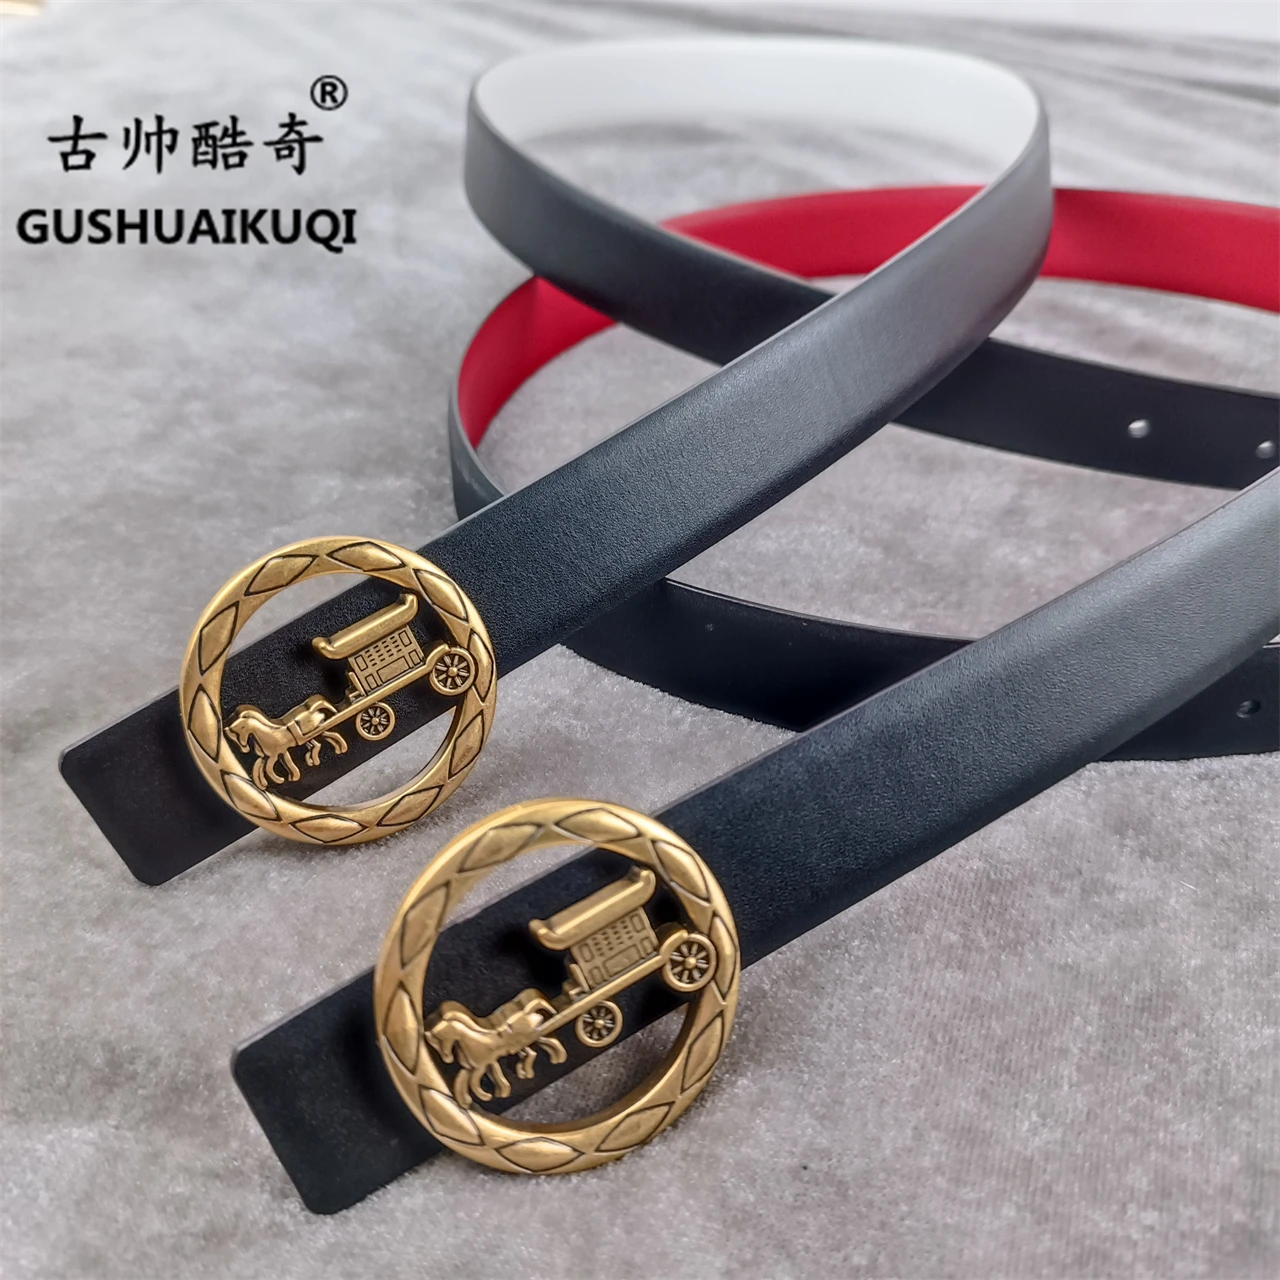 2023 men's and women's general width 2.5cm, Gu Shuai's new design men's and women's belt, high-quality cowhide leather, double-s